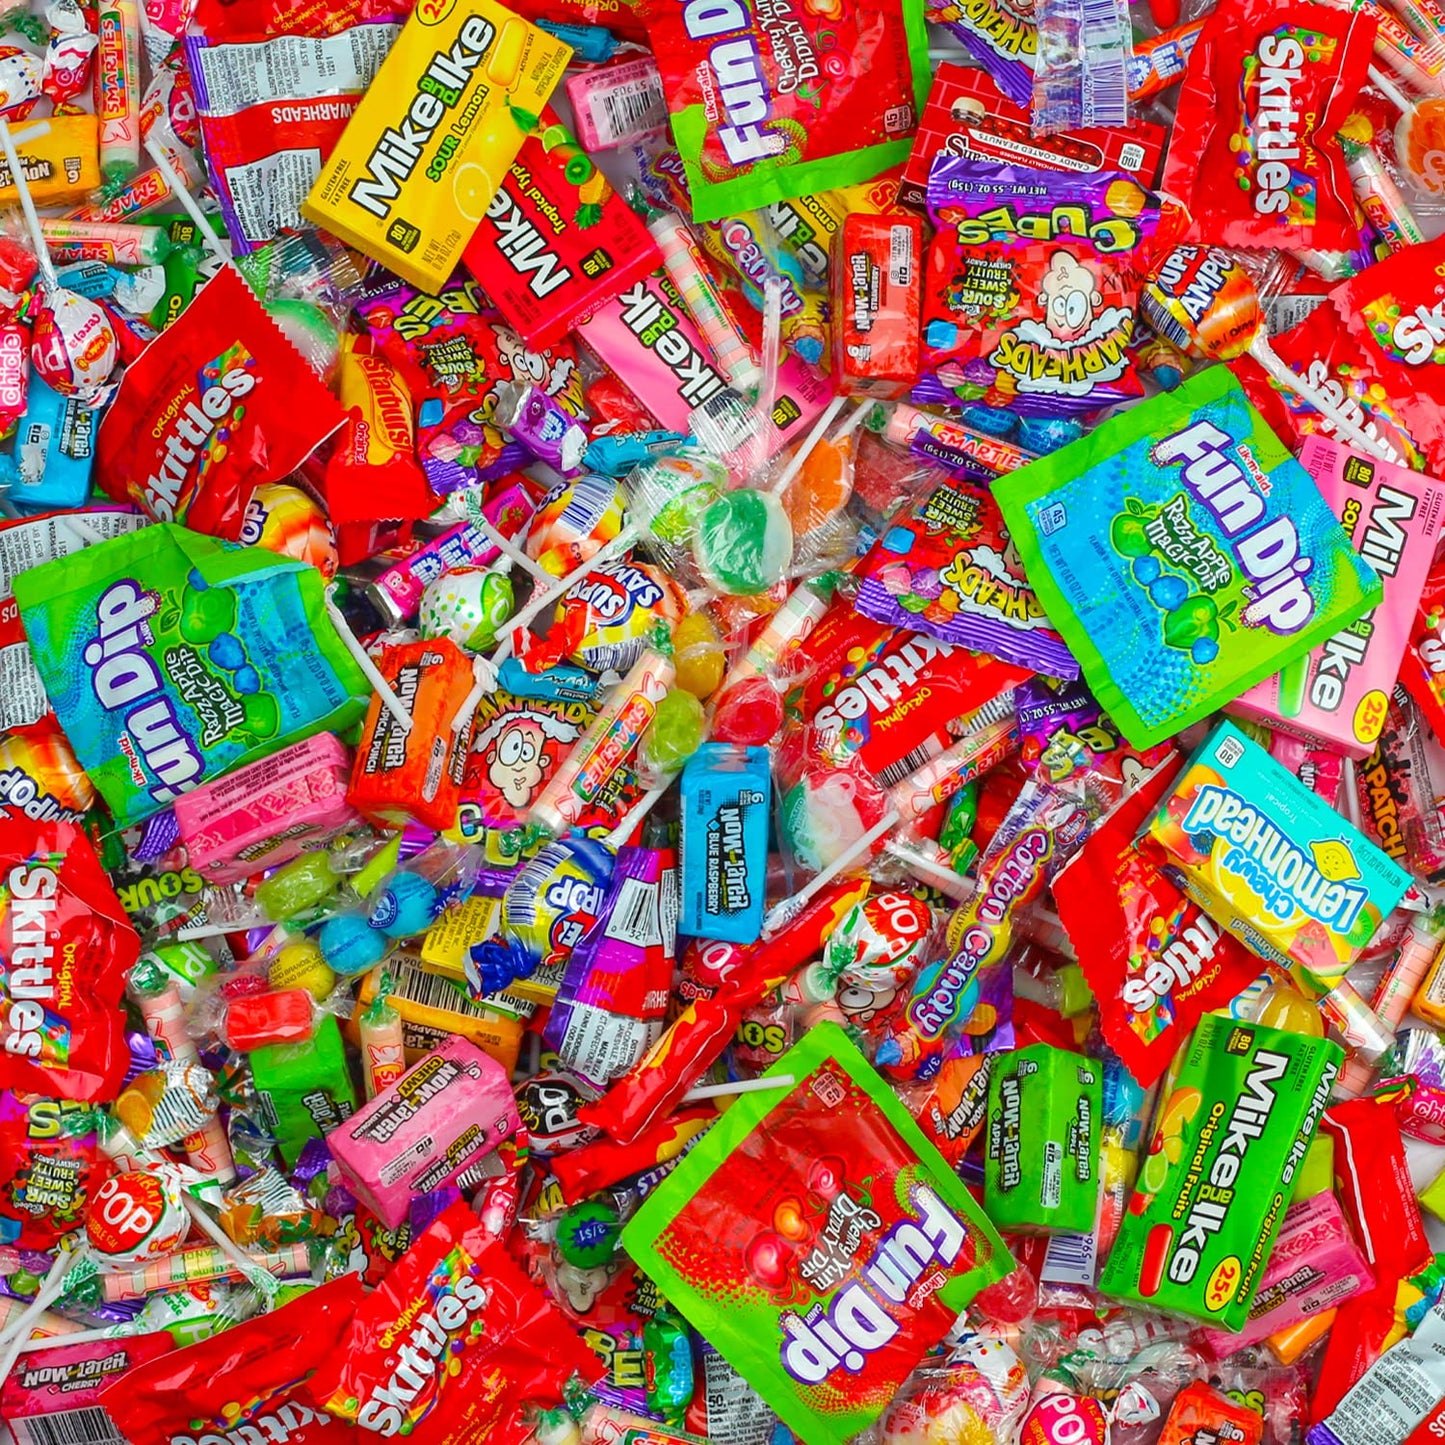 Pinata Candy Variety Pack - 2 Pounds - Candy for Party Bags